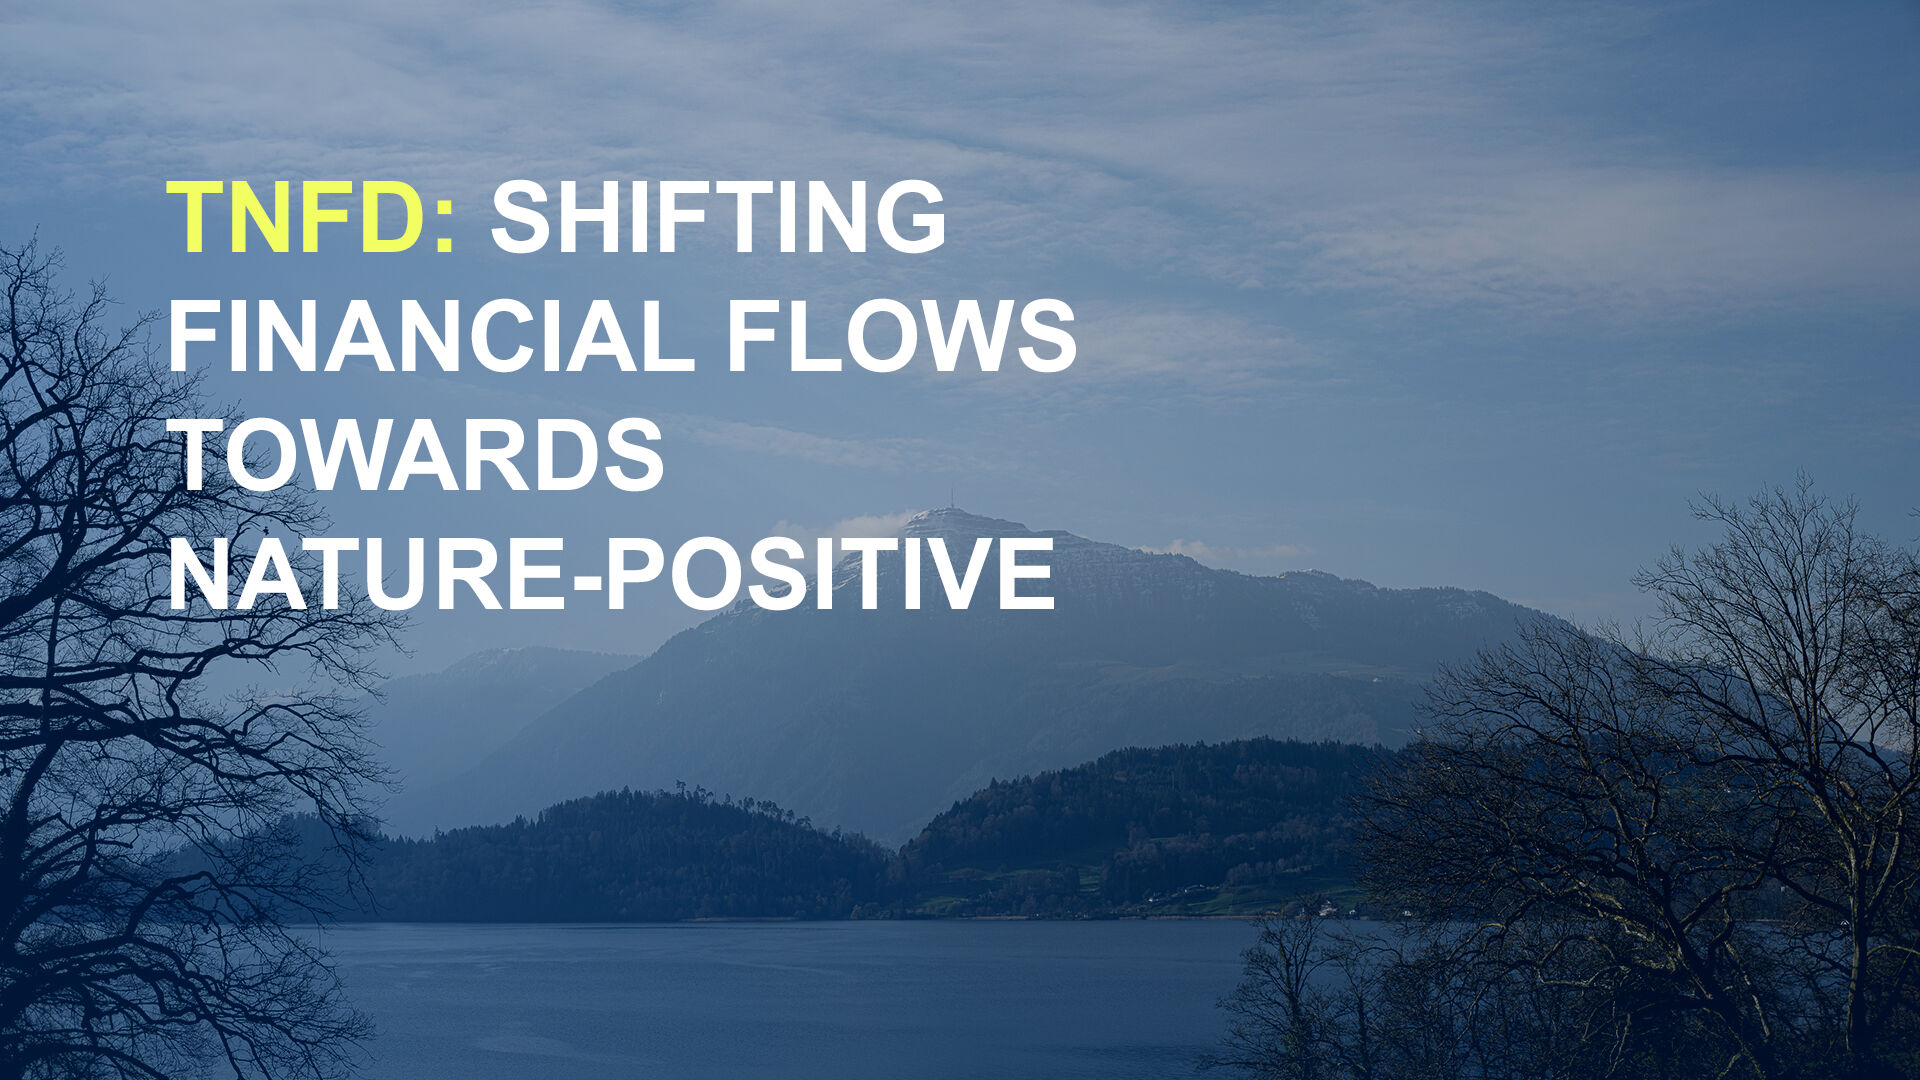 TNFD: Shifting financial flows towards nature positive outcomes